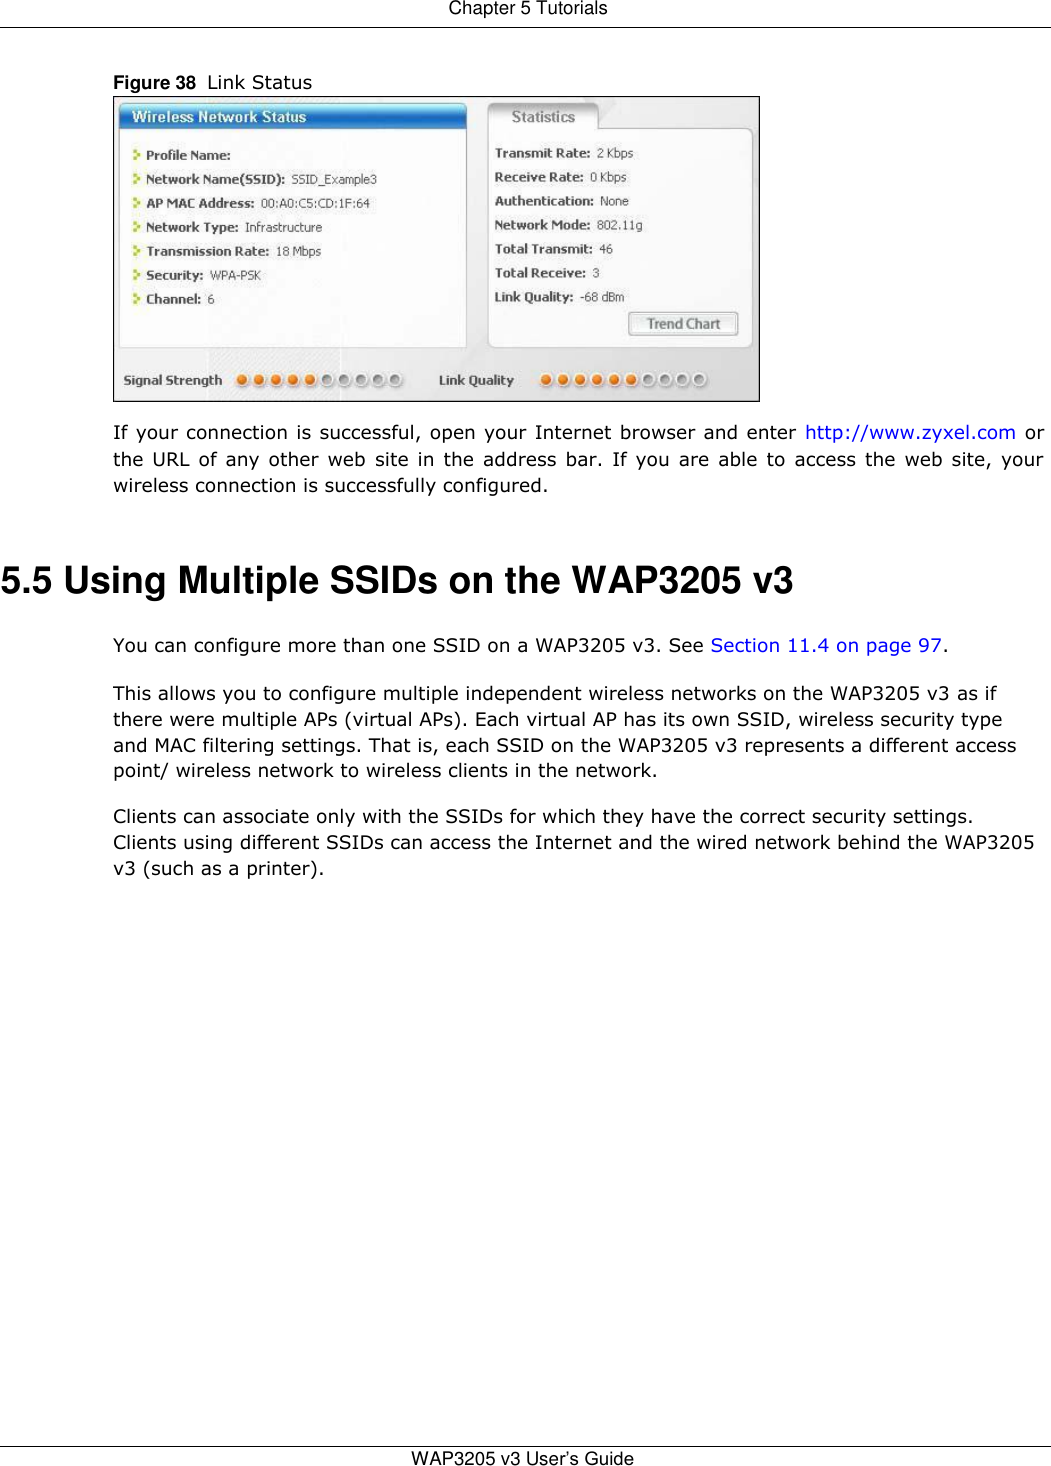 Chapter 5 Tutorials   Figure 38  Link Status                If your connection is successful, open your Internet browser and enter http://www.zyxel.com or the URL of any other web site in the address bar. If you are able to access the web site, your wireless connection is successfully configured.   5.5 Using Multiple SSIDs on the WAP3205 v3  You can configure more than one SSID on a WAP3205 v3. See Section 11.4 on page 97.  This allows you to configure multiple independent wireless networks on the WAP3205 v3 as if there were multiple APs (virtual APs). Each virtual AP has its own SSID, wireless security type and MAC filtering settings. That is, each SSID on the WAP3205 v3 represents a different access point/ wireless network to wireless clients in the network.  Clients can associate only with the SSIDs for which they have the correct security settings. Clients using different SSIDs can access the Internet and the wired network behind the WAP3205 v3 (such as a printer).                            WAP3205 v3 User’s Guide   